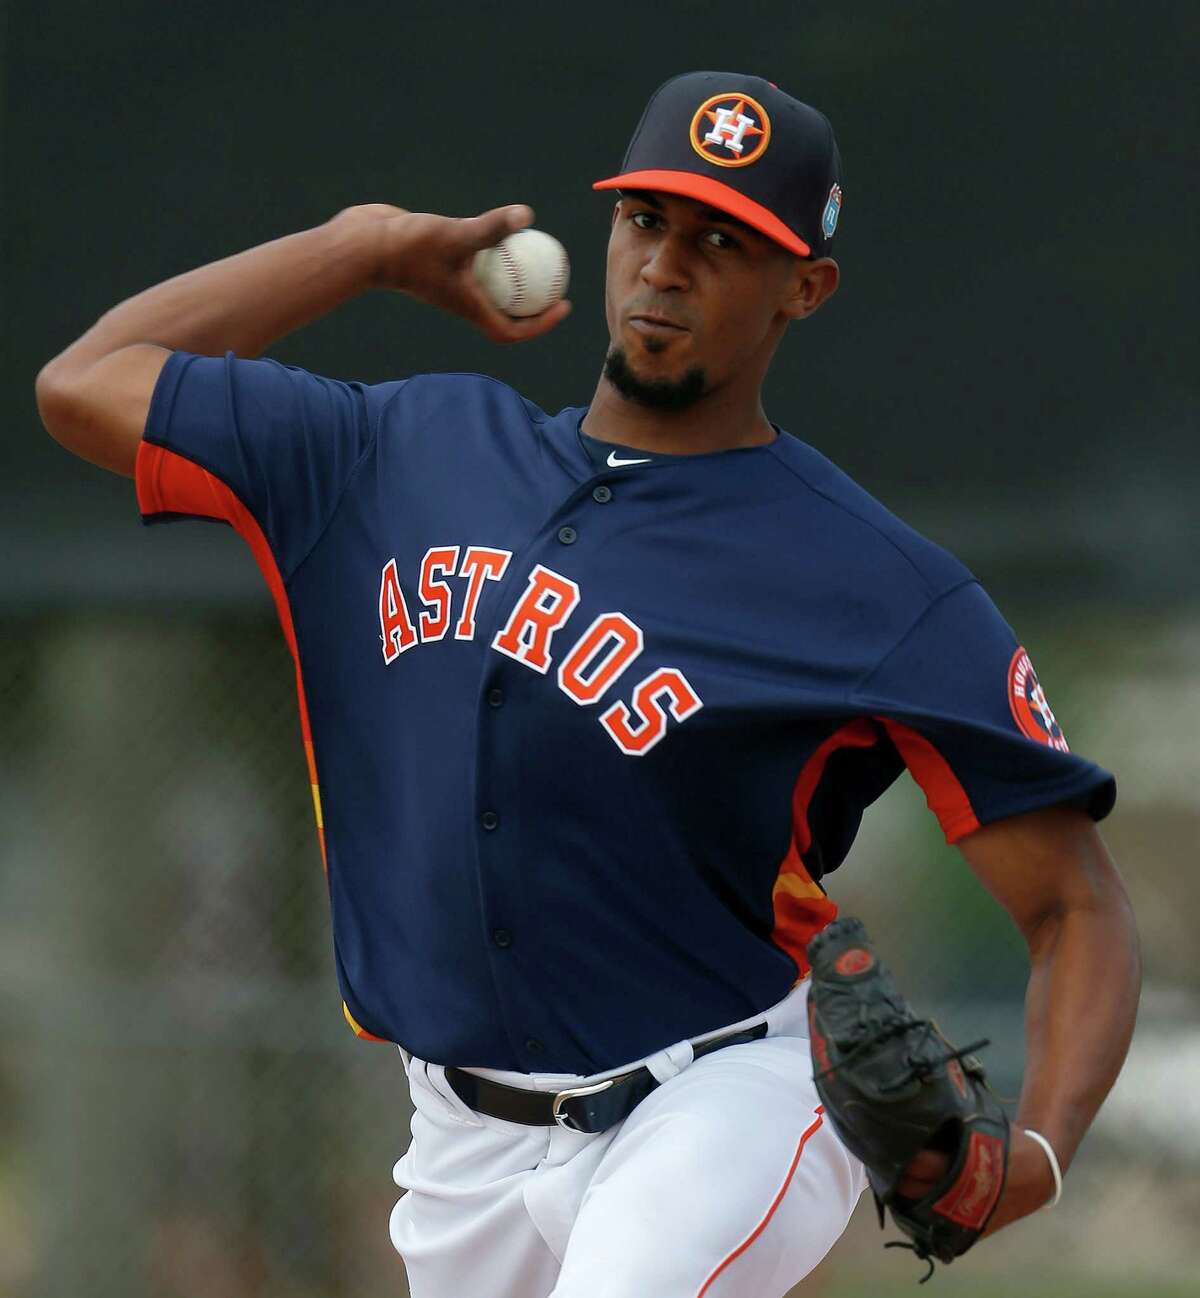 Astros pitching prospect Juan Minaya, who was 1-0 with a 2.80 ERA over 35 minor league outings last season, has been a fast learner of the English language.